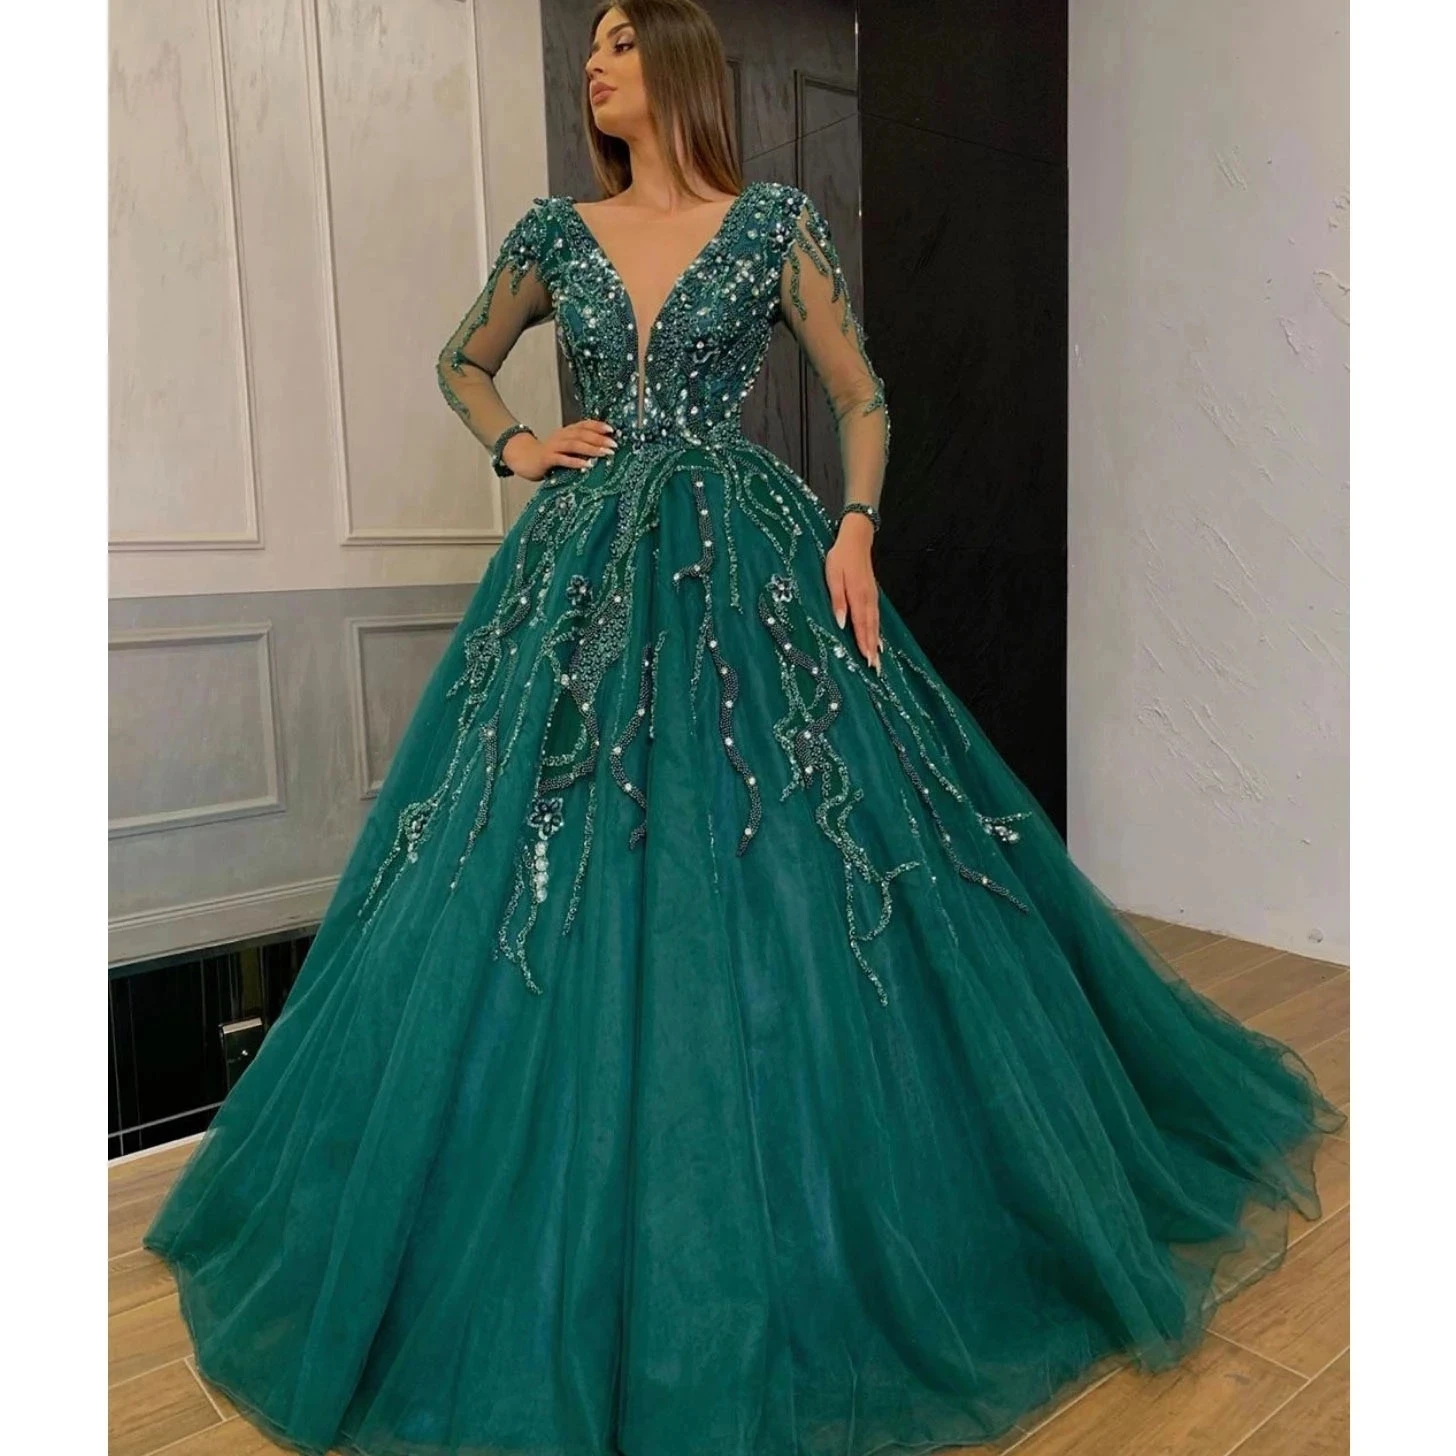 

Green Luxury Women's Prom Dresses Lace Applique Sexy V-Neck Long Sleeve Tulle Fashion Celebrity Plus Size Evening Gowns فساتين س